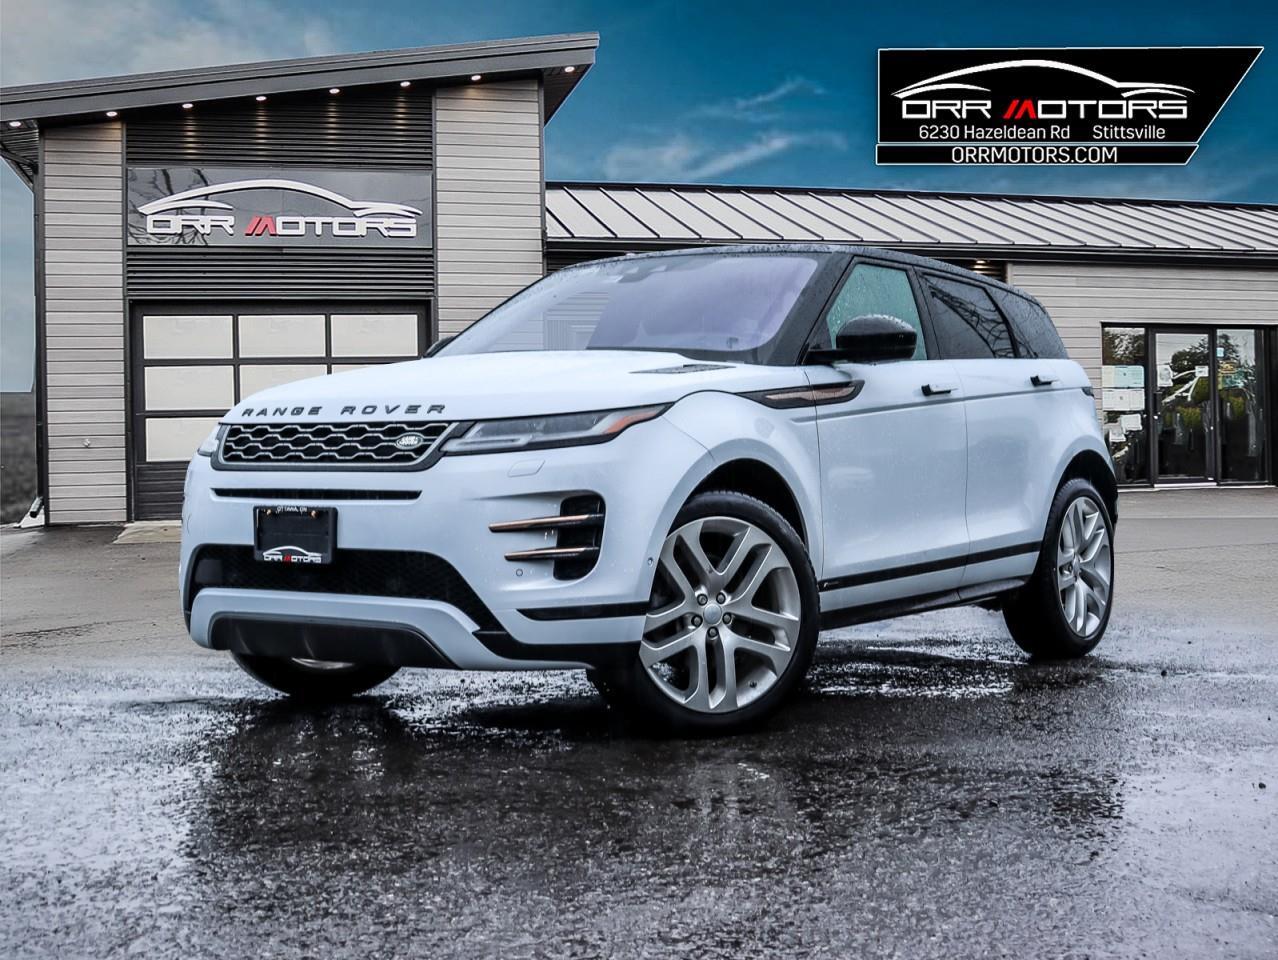 2020 Land Rover Range Rover Evoque First Edition **COMING SOON** FIRST EDITION!